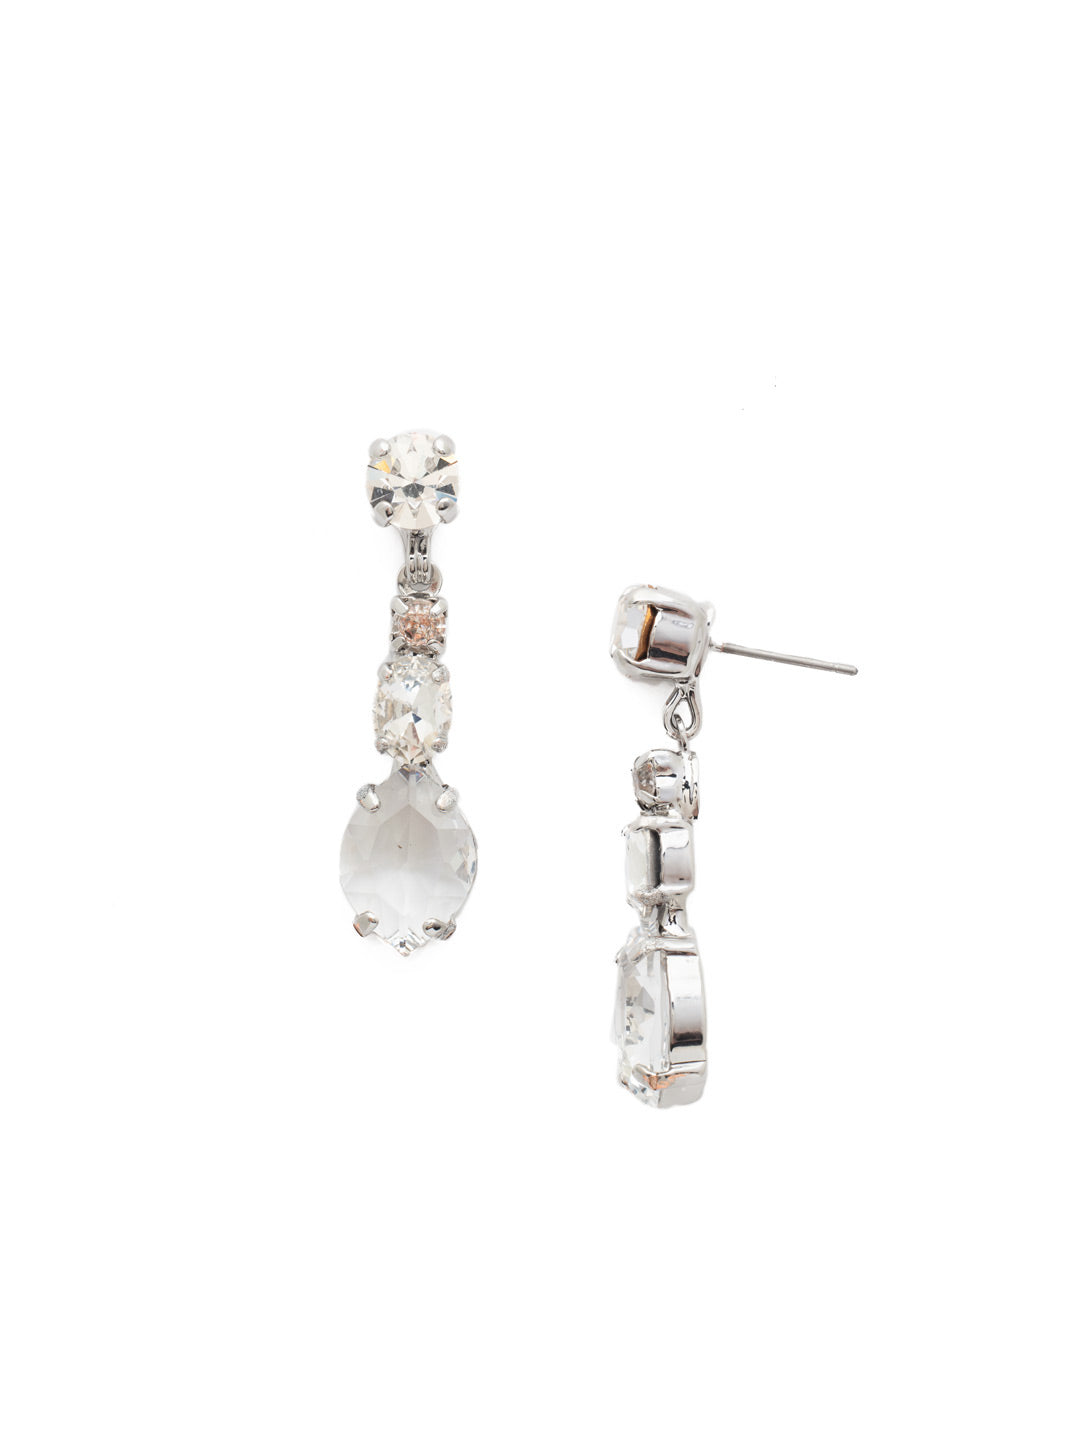 Dynamic Dangle Earring - ECG32PDCRY - <p>Dynamic Dangle Earrings; These earrings feature a round cut stone at the post and links round and oval cut stones in ascending sizes. A large marquise cut stone is set in metal prongs and anchors the entire piece. From Sorrelli's Crystal collection in our Palladium finish.</p>